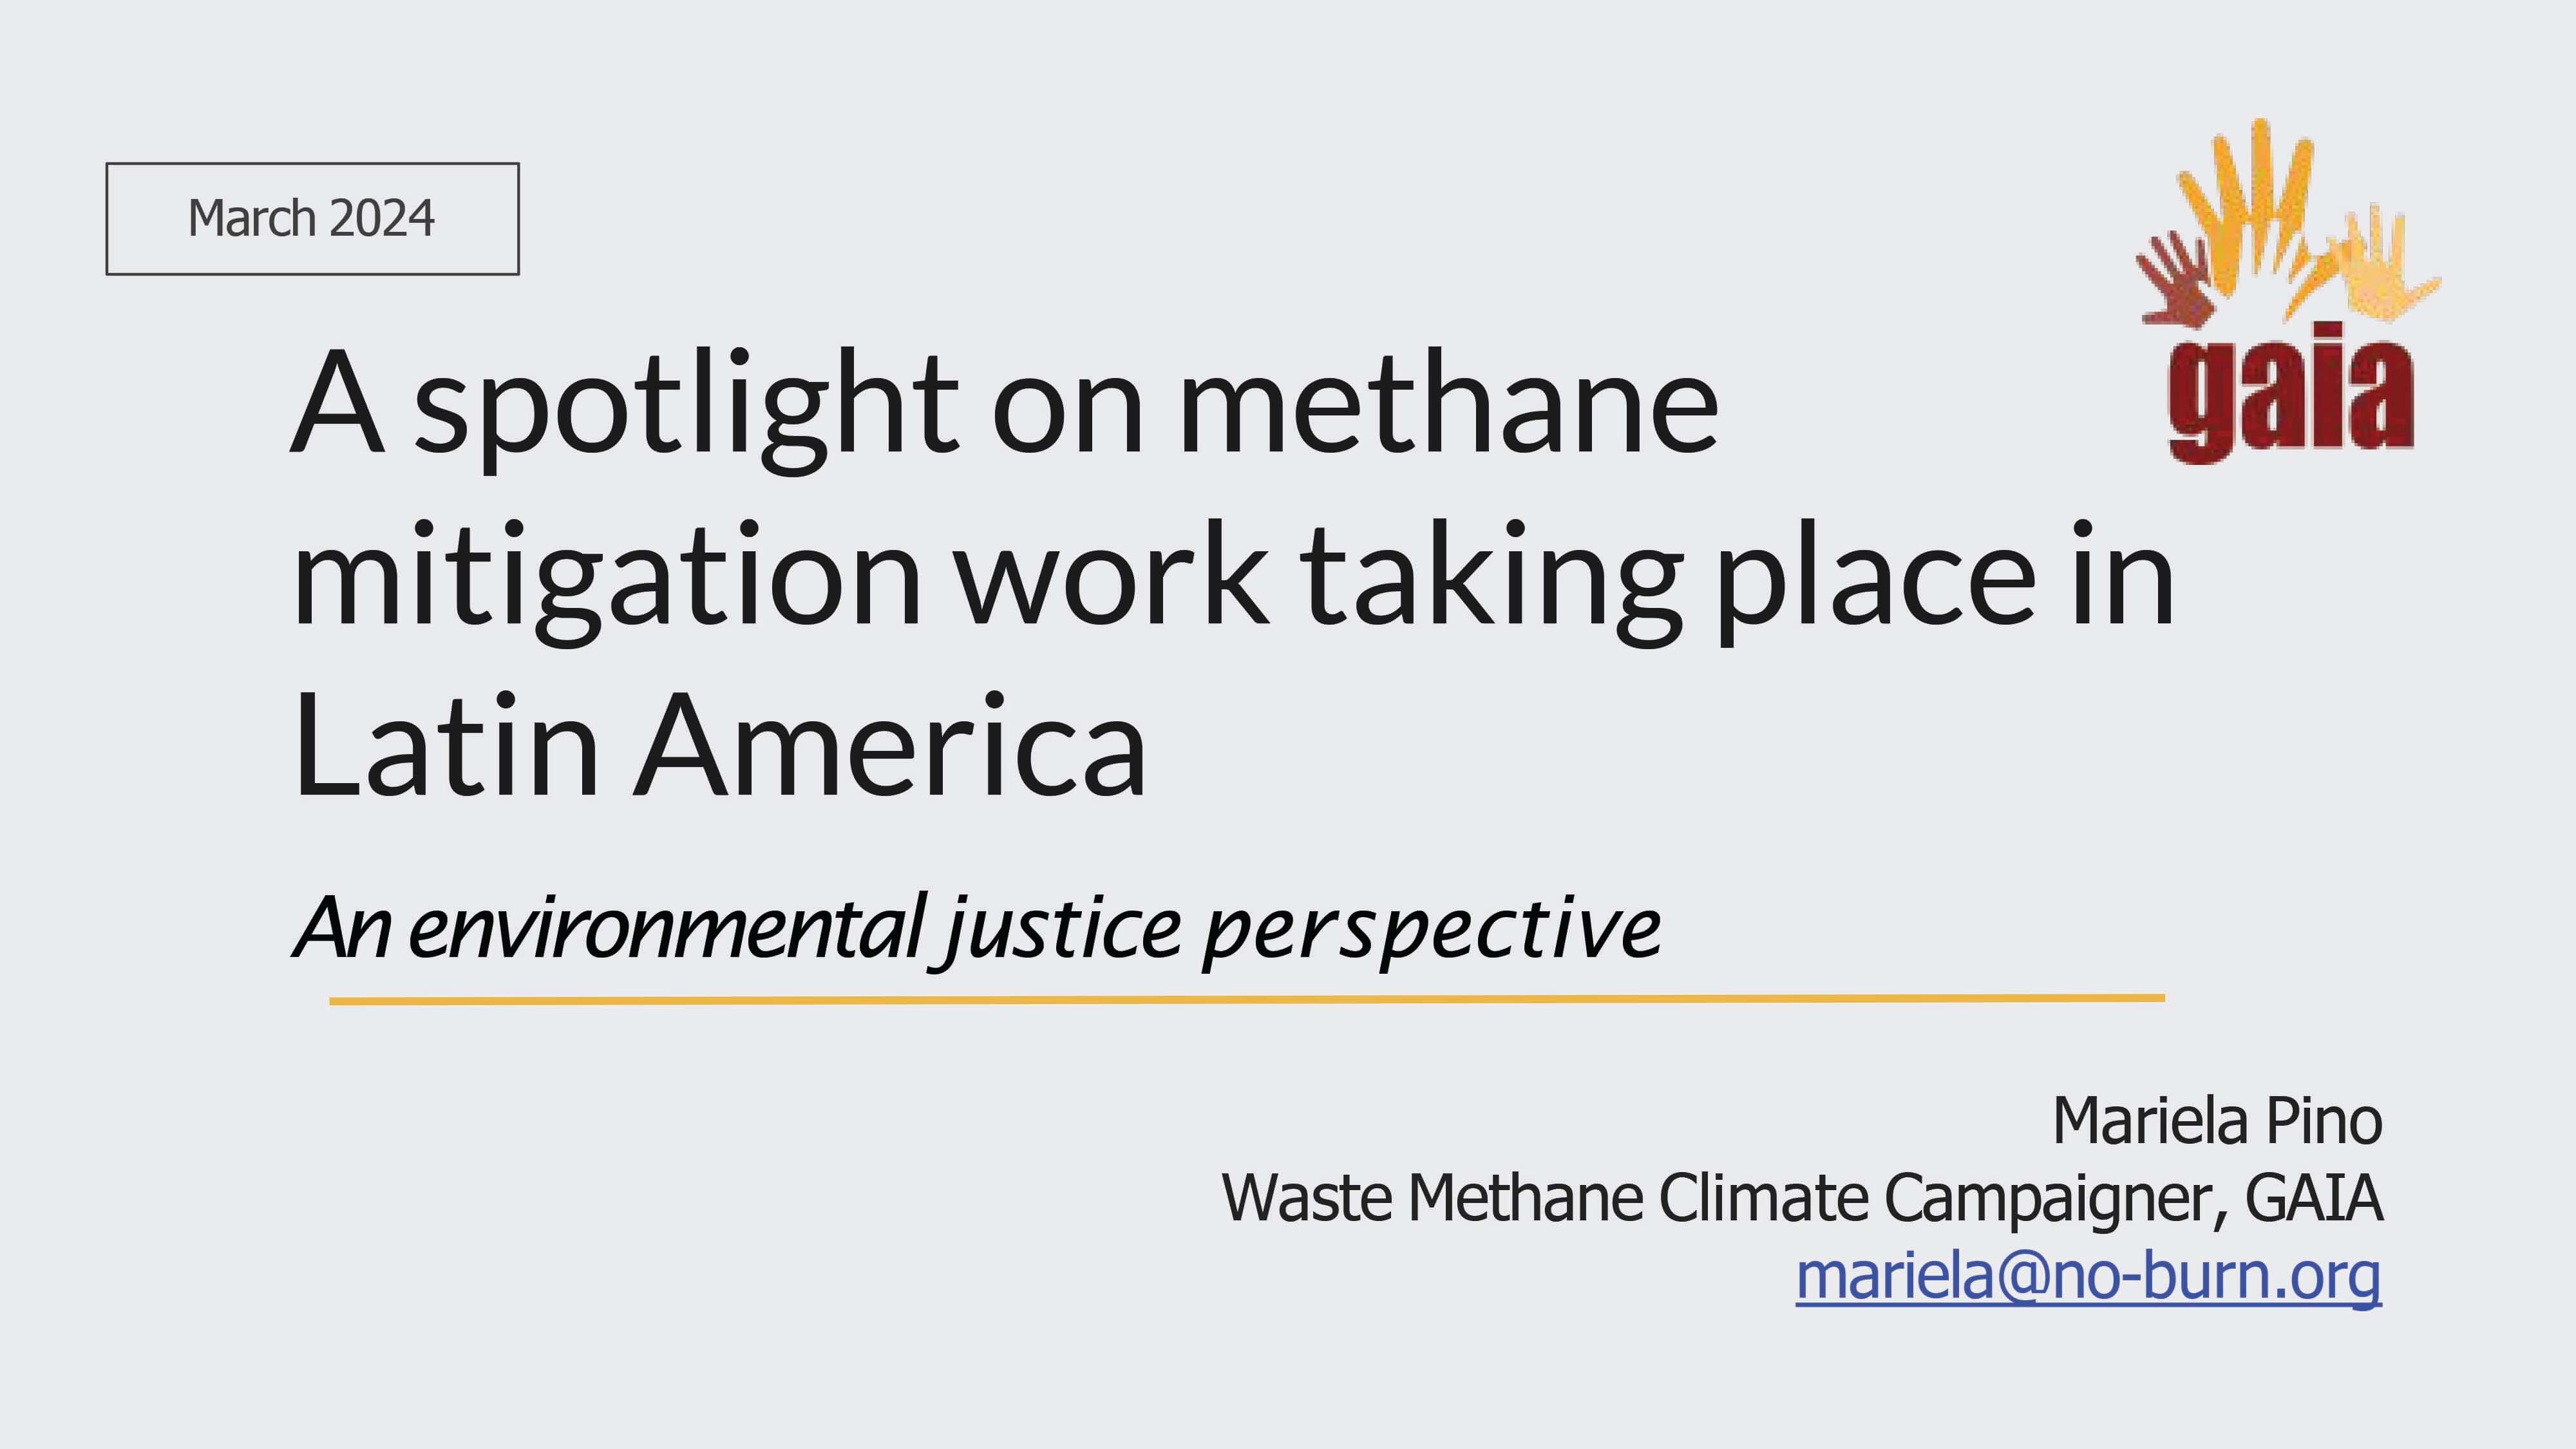 A spotlight on methane mitigation work in Latin America: An environmental justice perspective